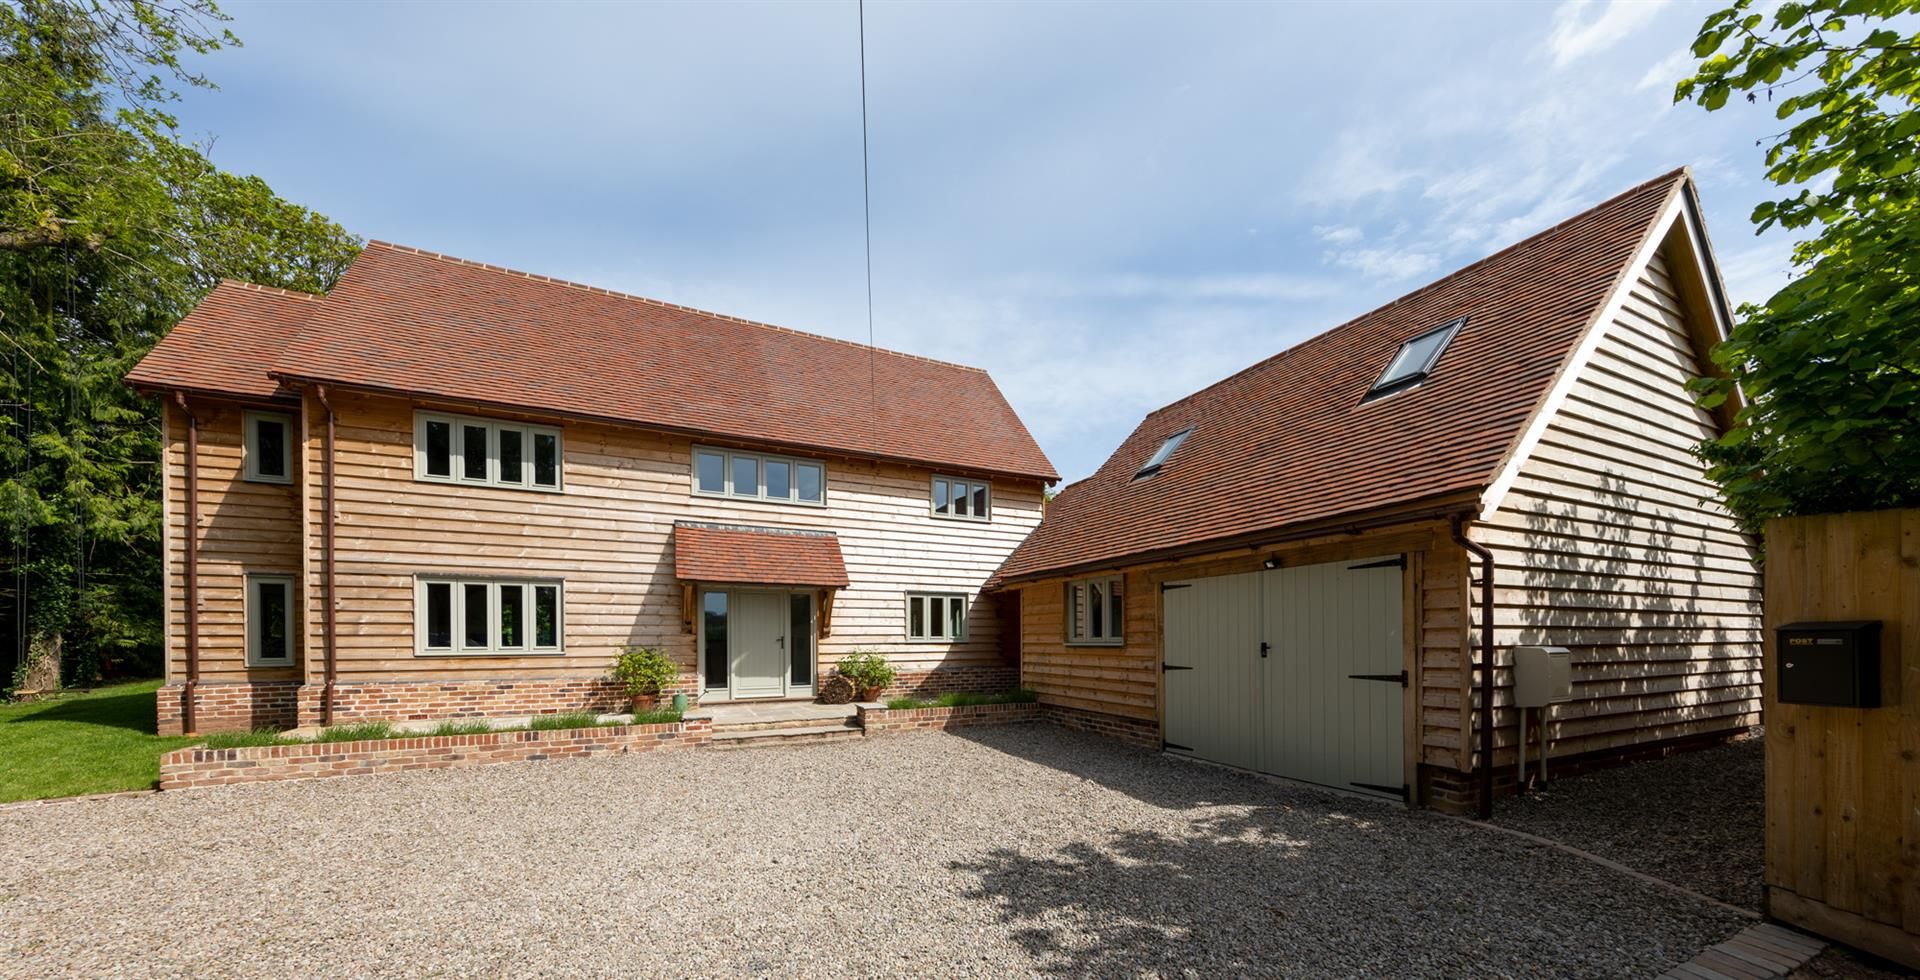 4 bed detached for sale in Bodenham 29